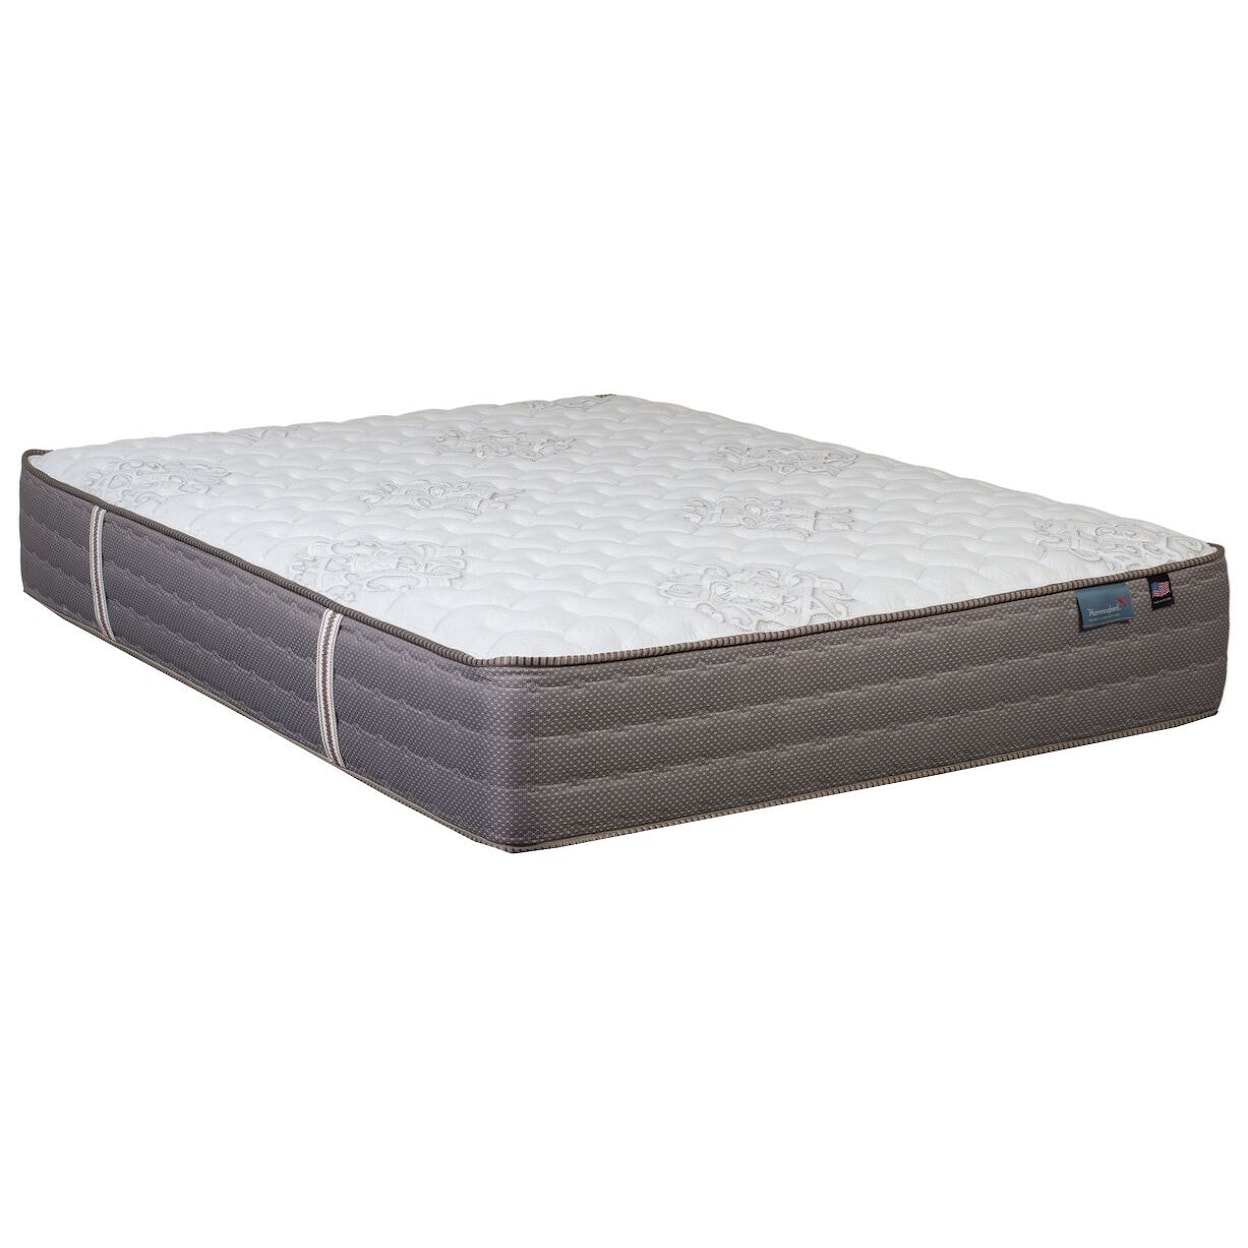 Therapedic Mystic Cloud Firm Full Firm Pocketed Coil Mattress